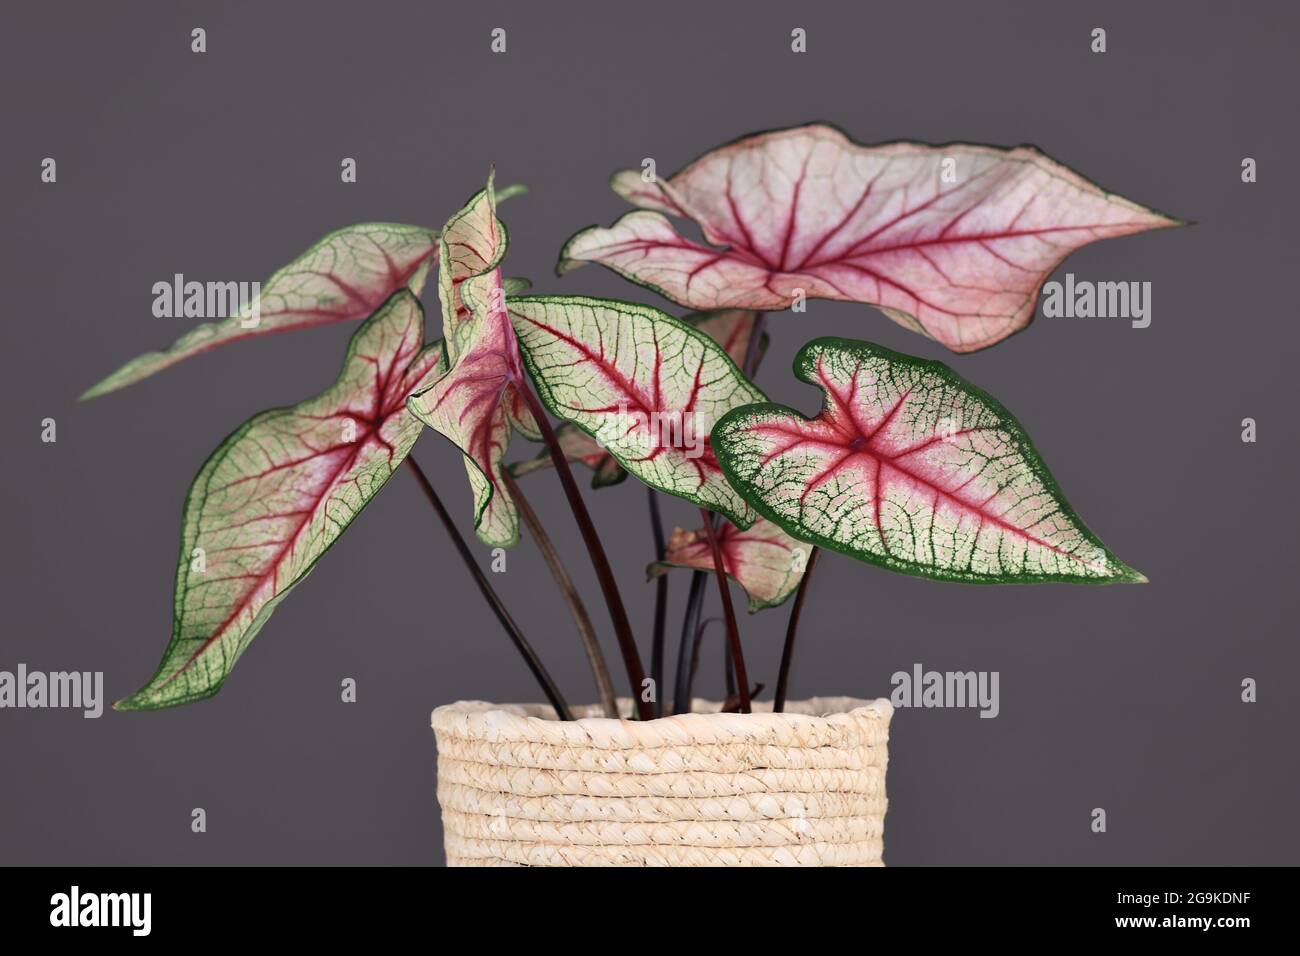 Beautiful exotic 'Caladium White Queen' plant with white leaves and pink veins in pot in front of gray background Stock Photo